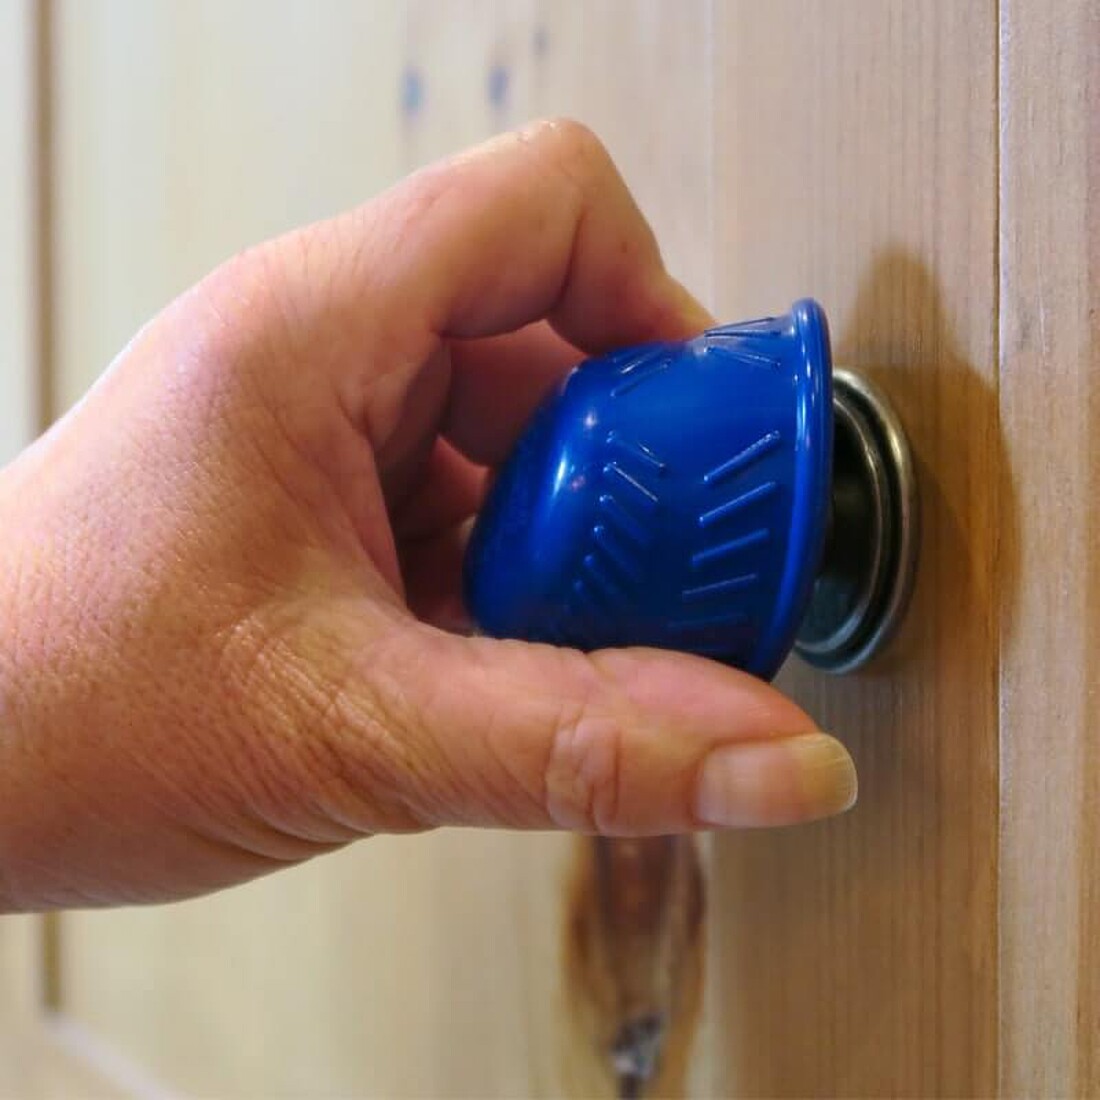 A blue silicone bottle opener being used to open a door handle